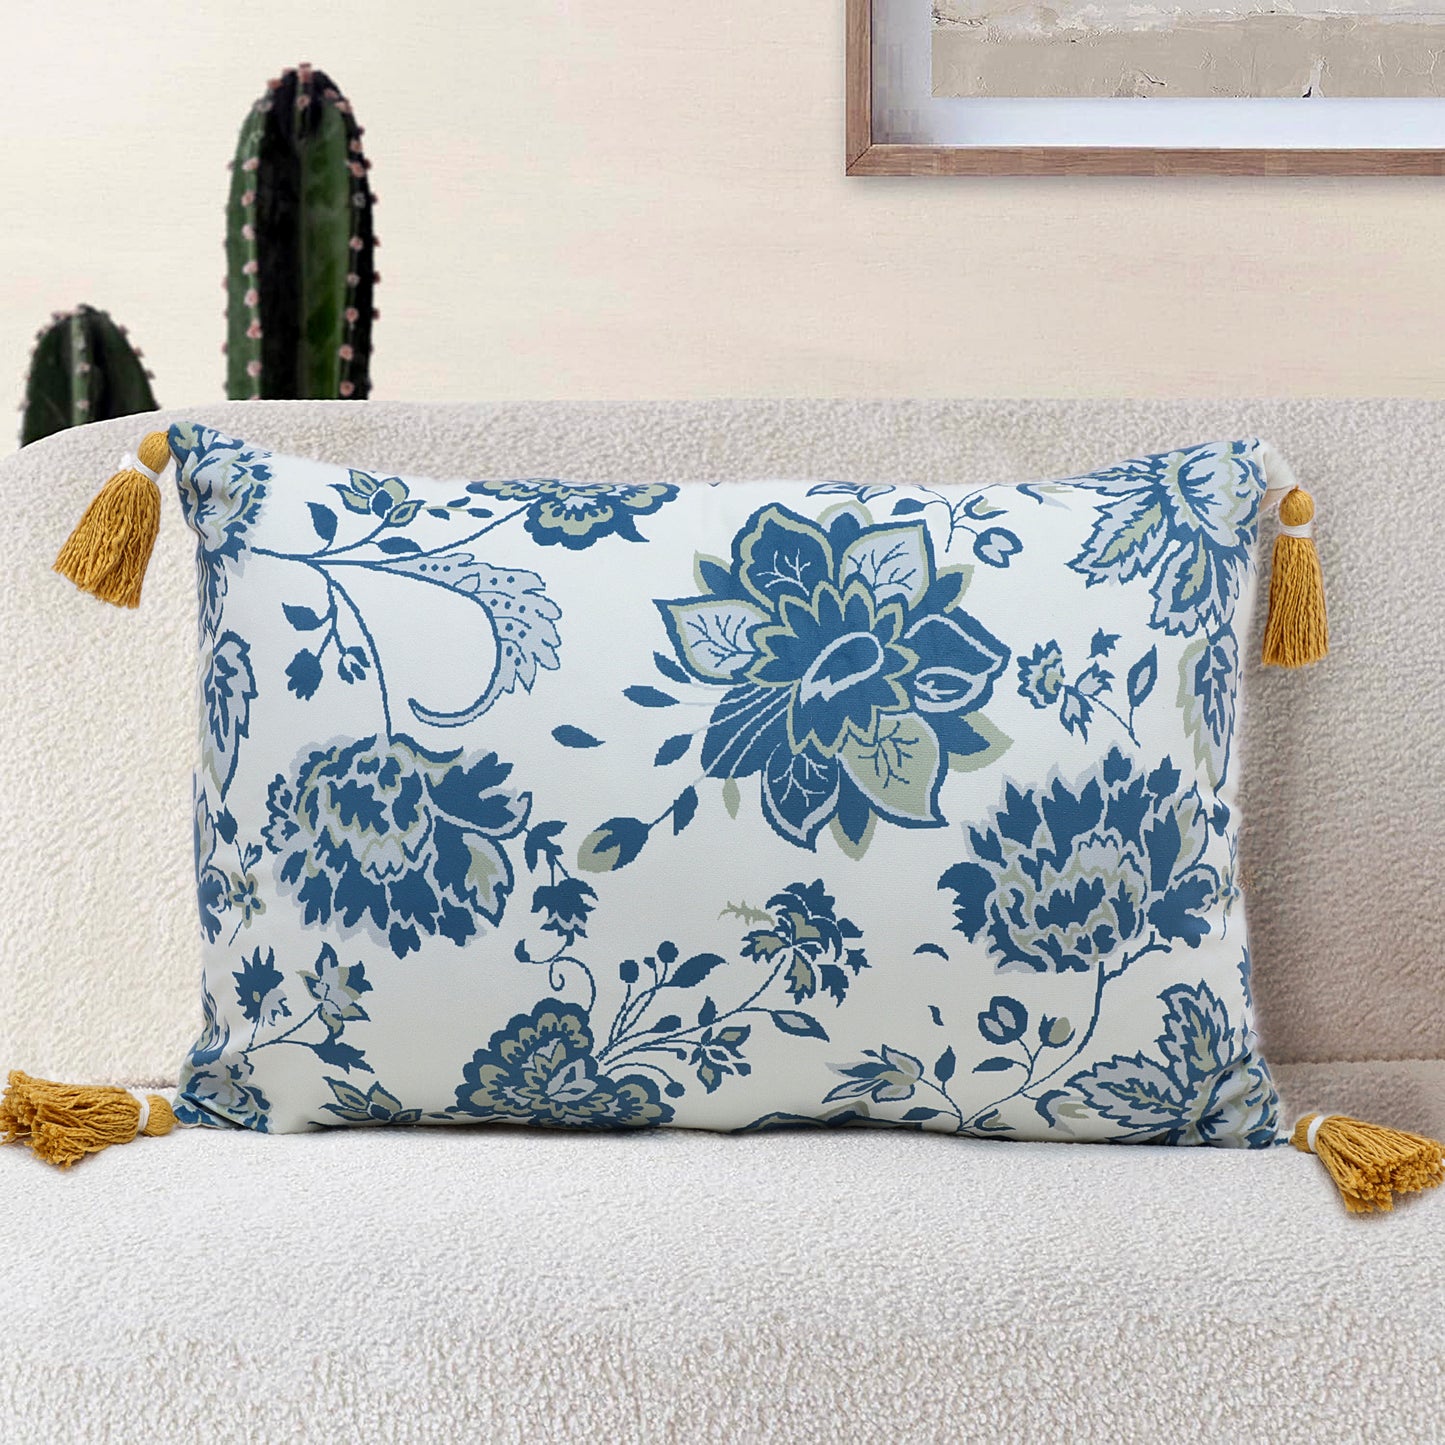 White and Blue Polyester Digital Printed Cushion Cover With Tassels